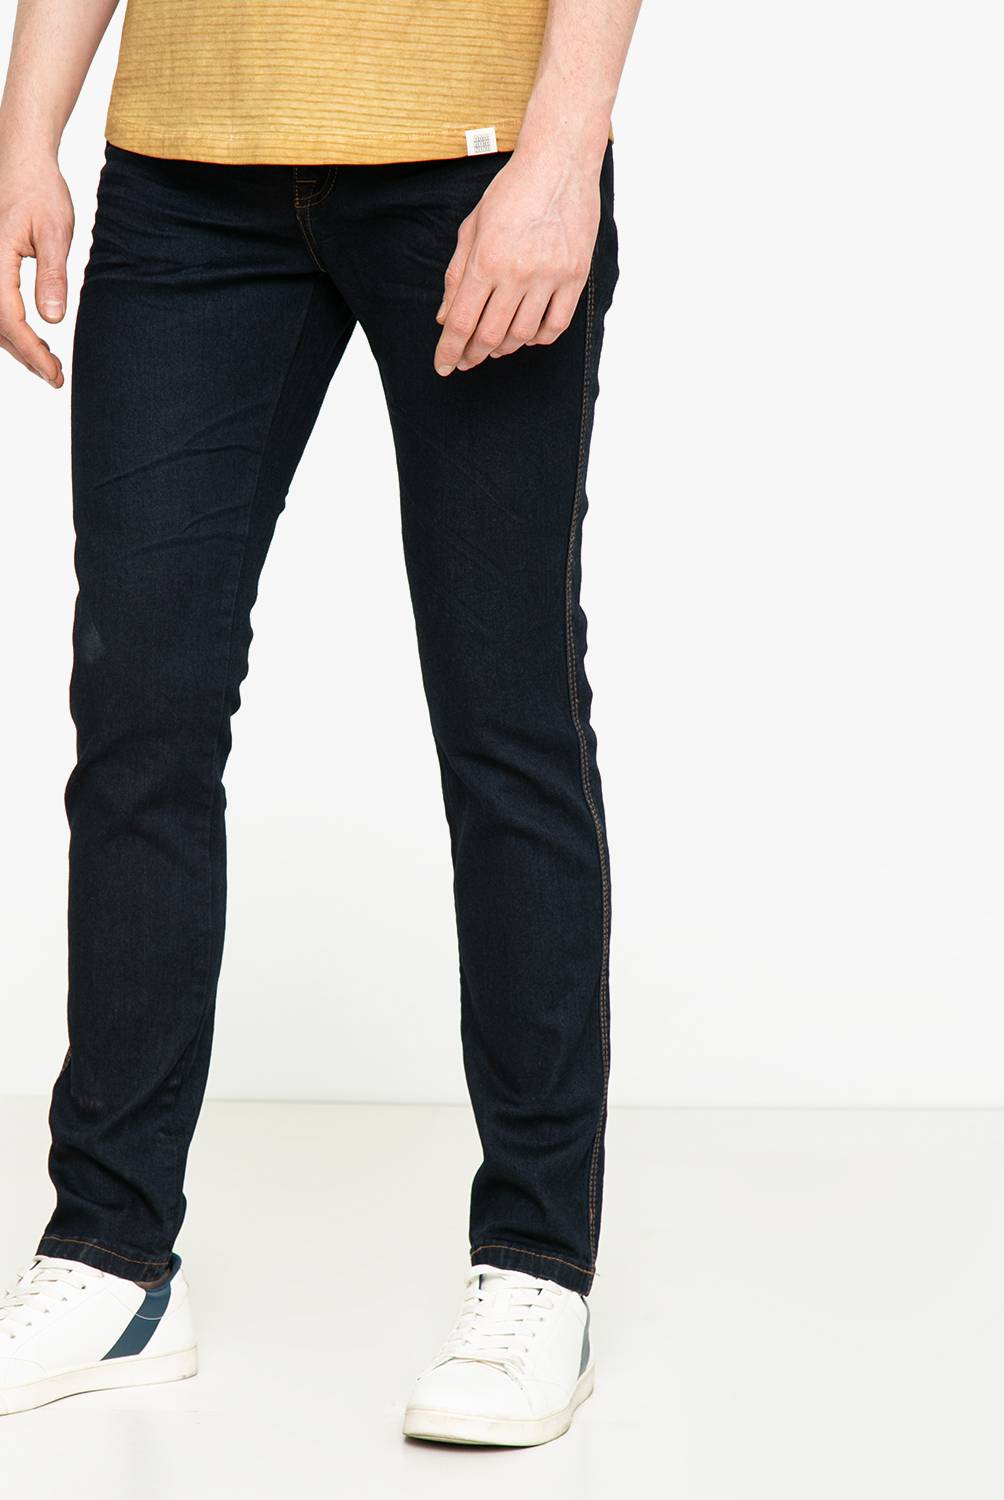 AMERICANINO - Jeans Casual Skinny Fit